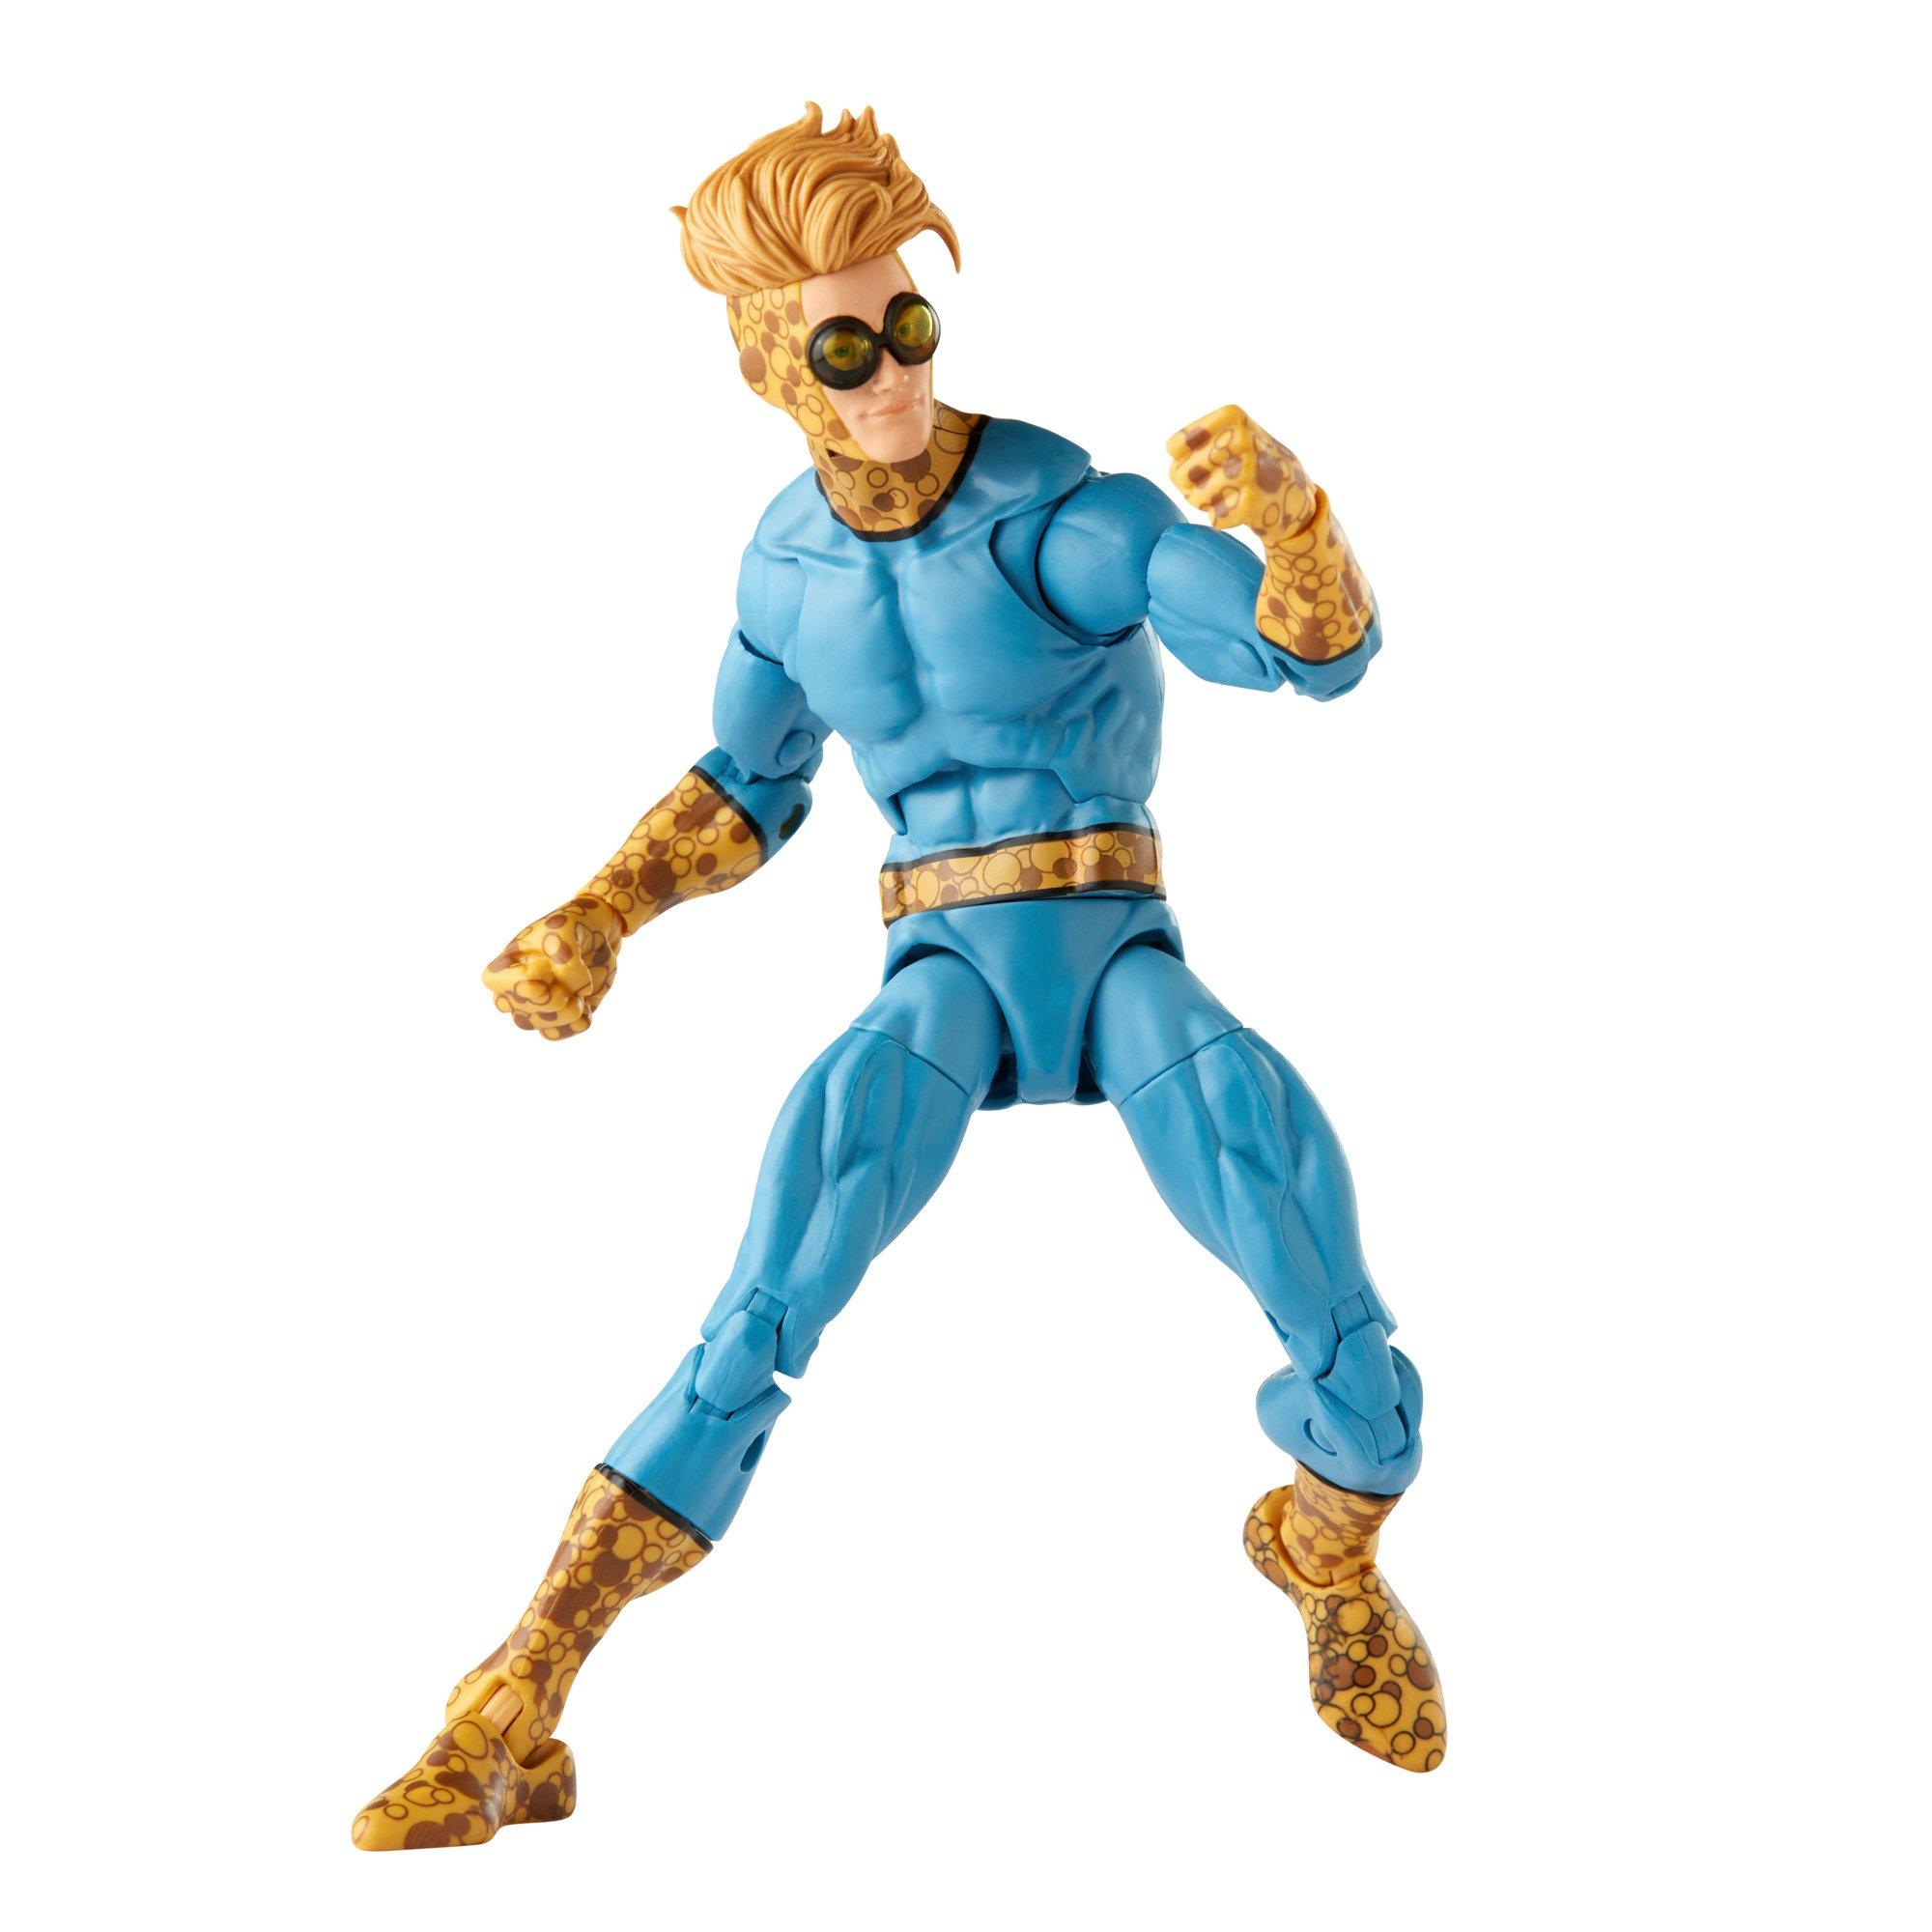 Marvel Legends Series Speedball Classic Comics Action Figure 6-inch Collectible Toy 1 Build-A-Figure Part 